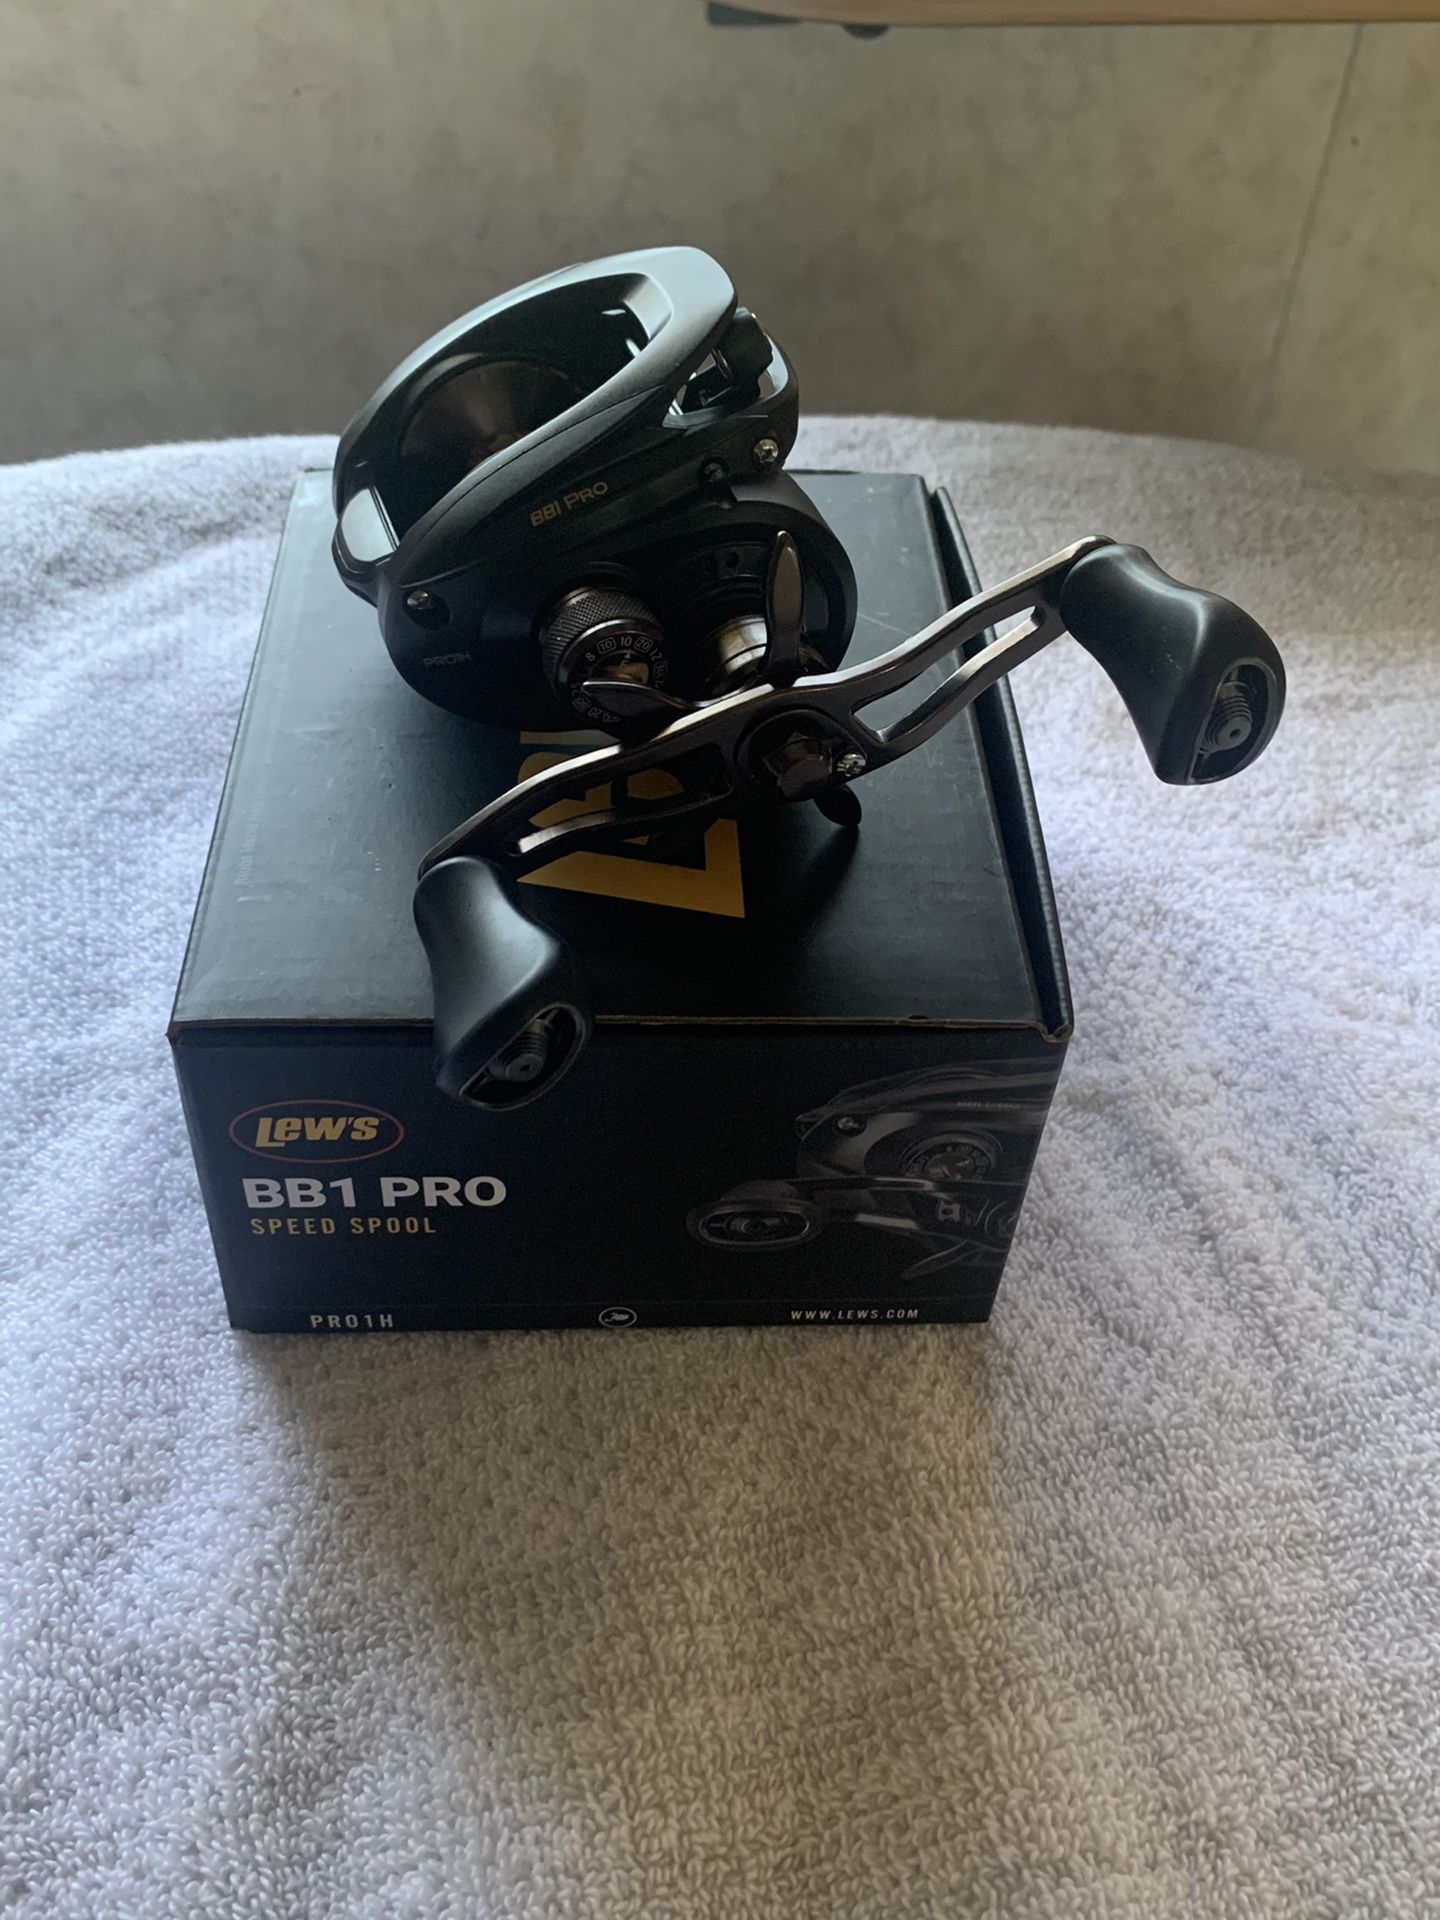 Lew's BB1 Pro Speed Spool Reel for Sale in Texas City, TX - OfferUp